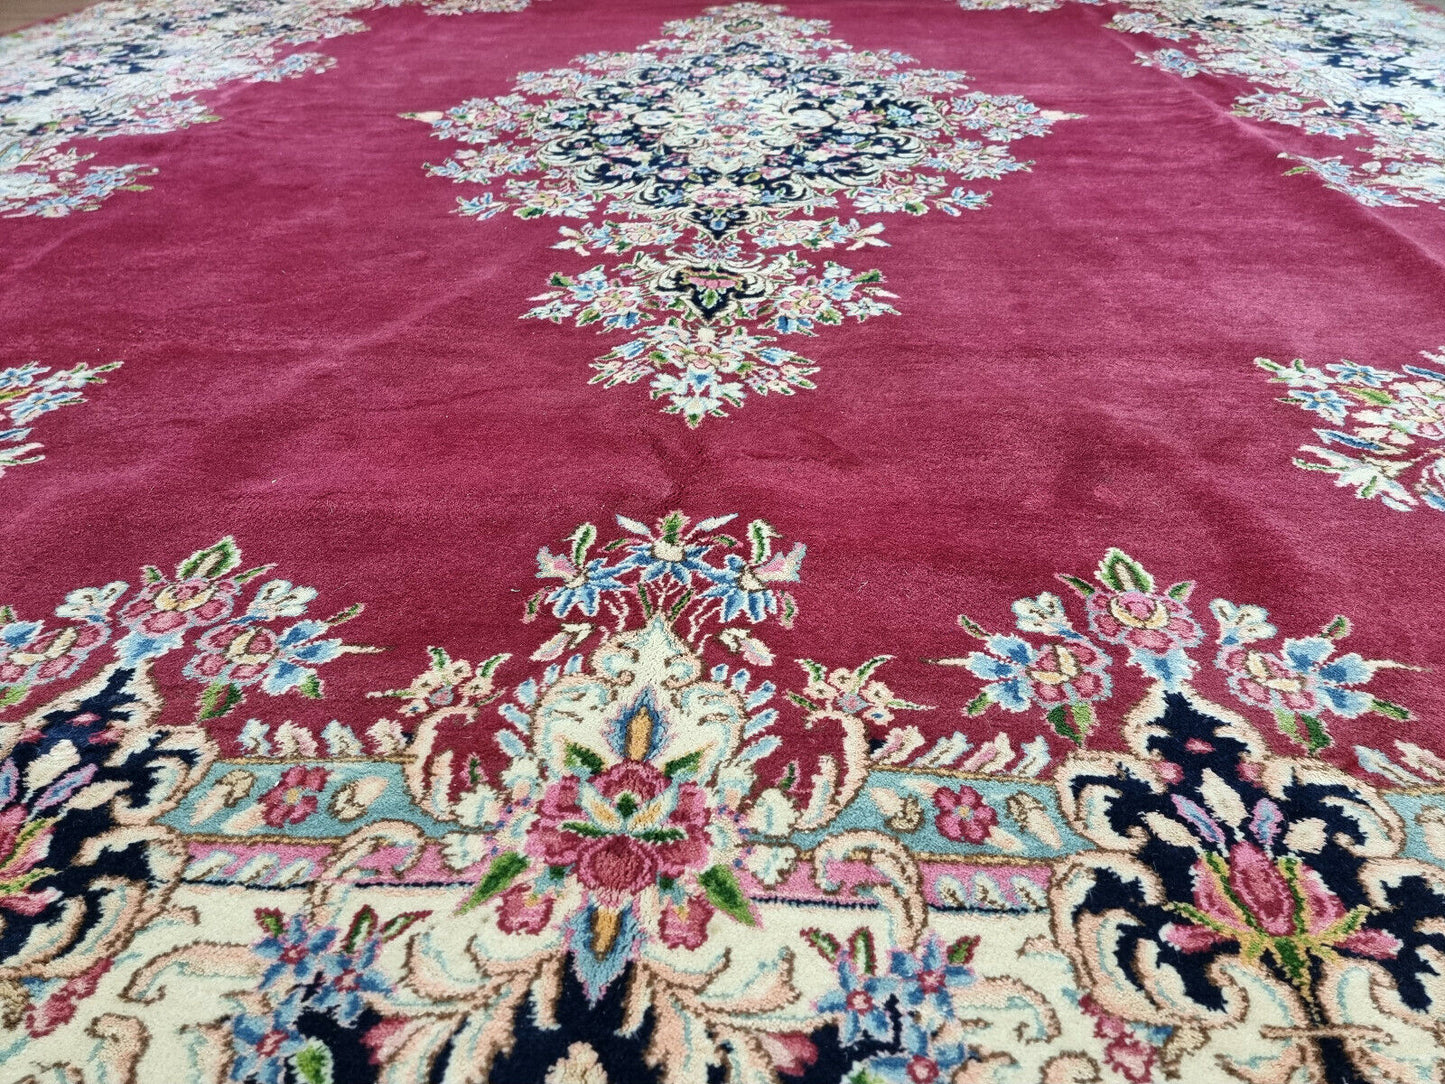 Close-up of large ornate medallion on Handmade Vintage Persian Kerman Rug - Detailed view highlighting the intricate patterns of the central medallion.